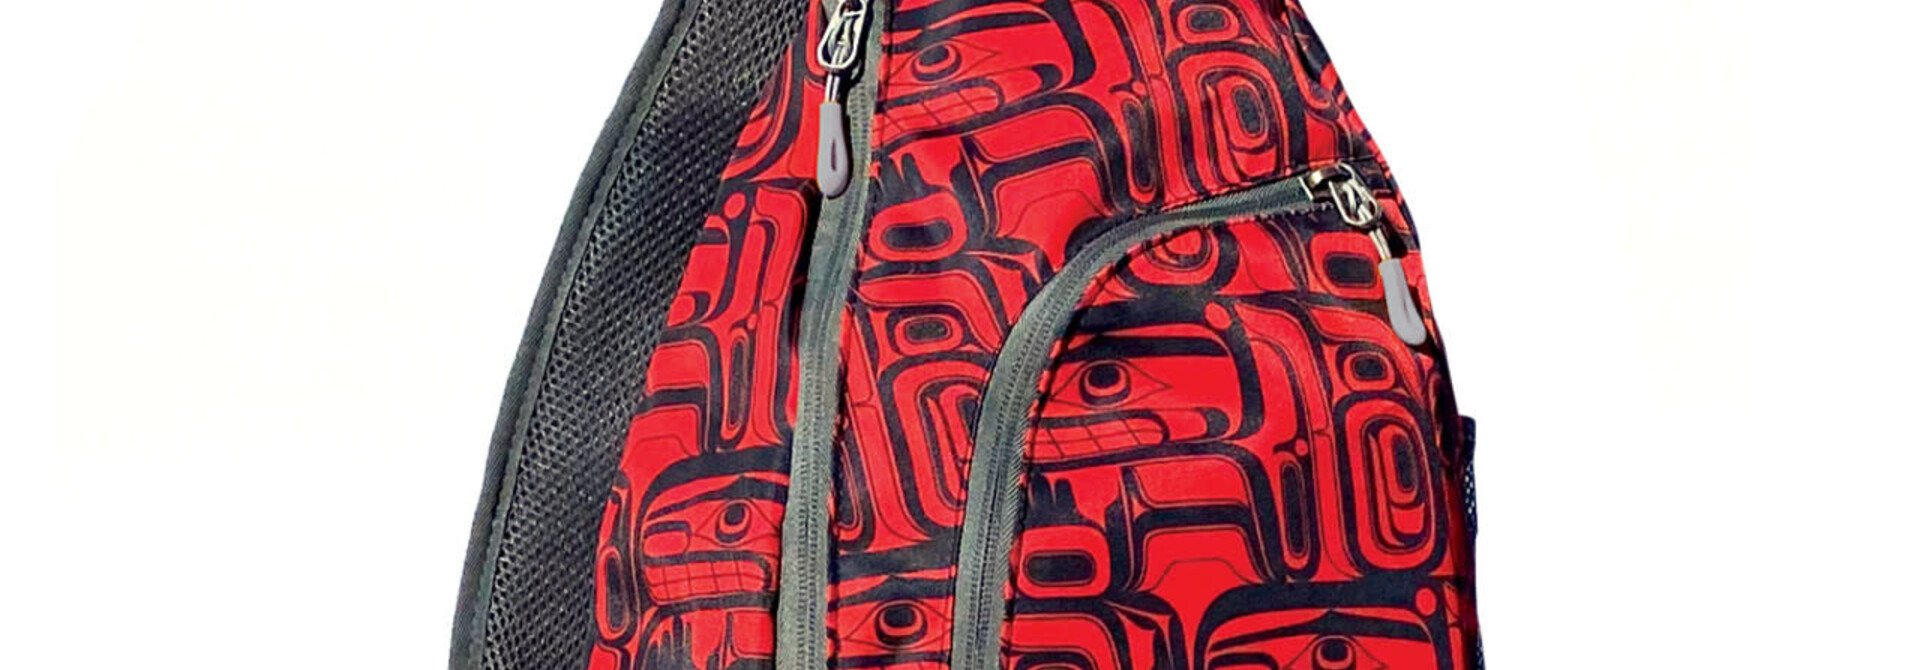 Sling Pack - Tradition by Ryan Cranmer